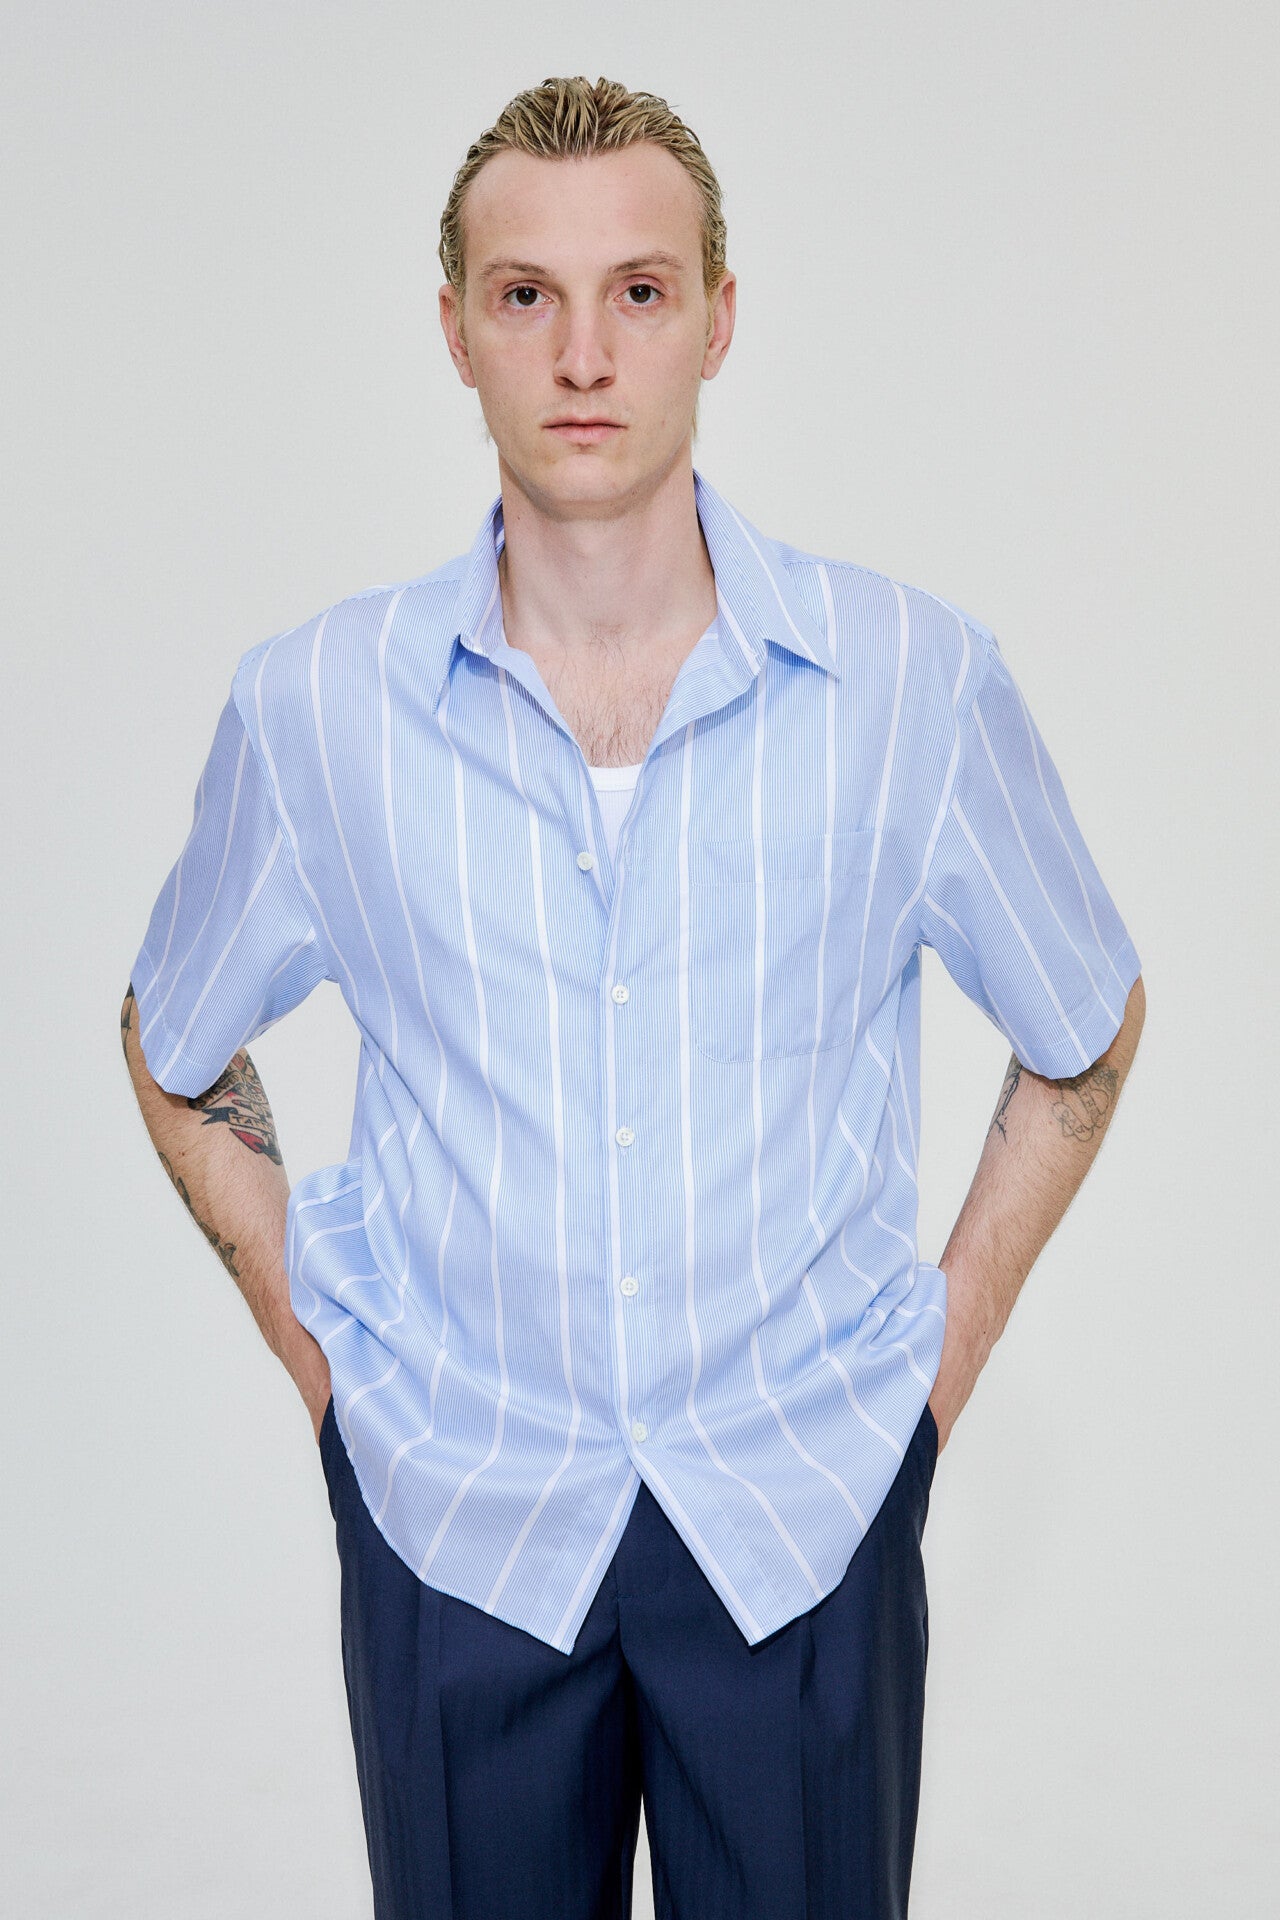 Ode shirt in stripe by goutez